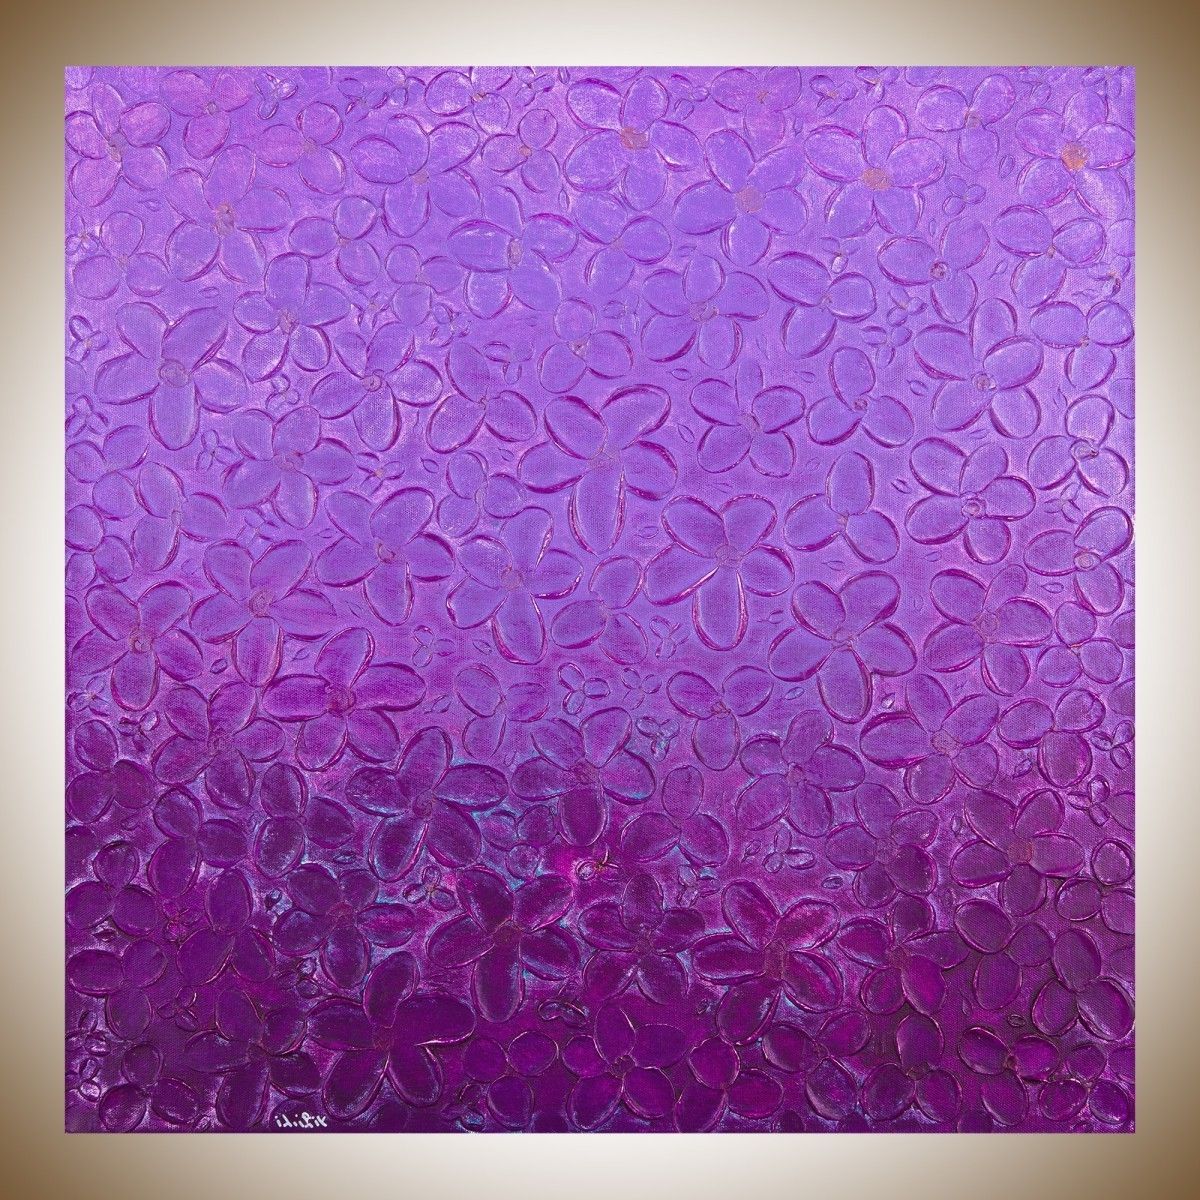 Forget Me Notqiqigallery 24" X 24" Purple Painting Oil Art Intended For Most Current Purple Abstract Wall Art (View 14 of 15)